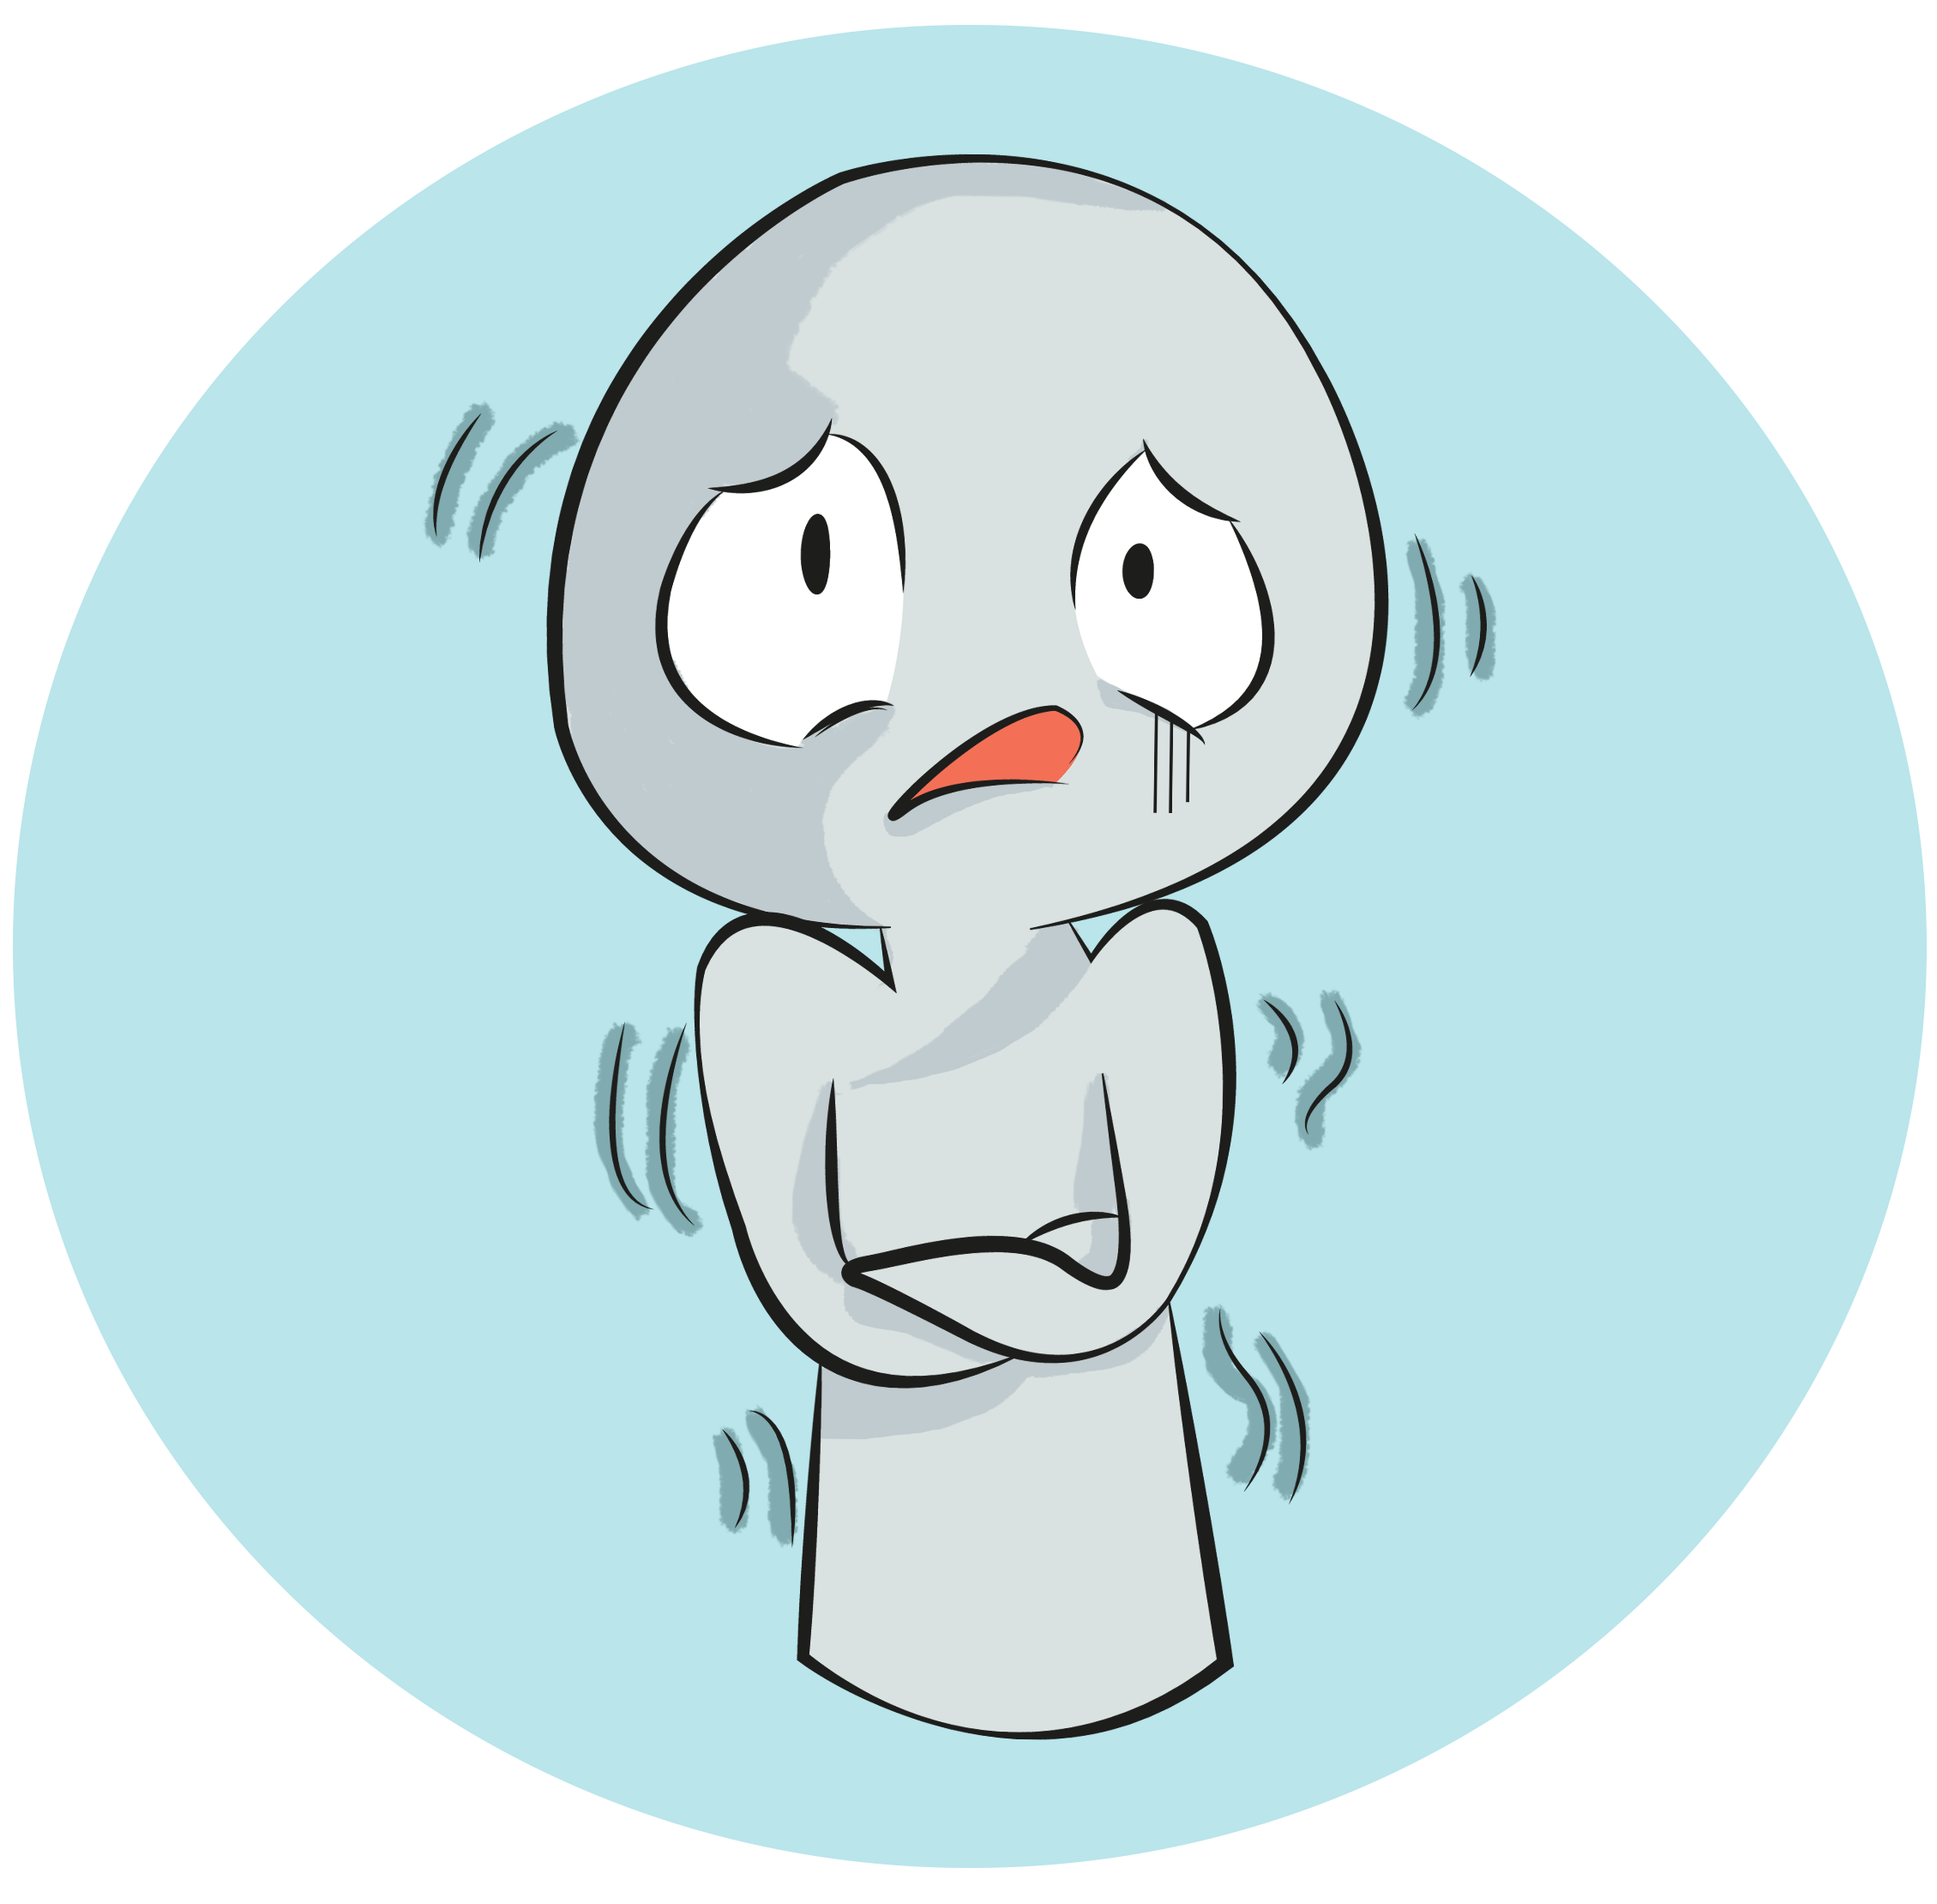 Worry clipart clinical depression. Anxiety disorder and addiction